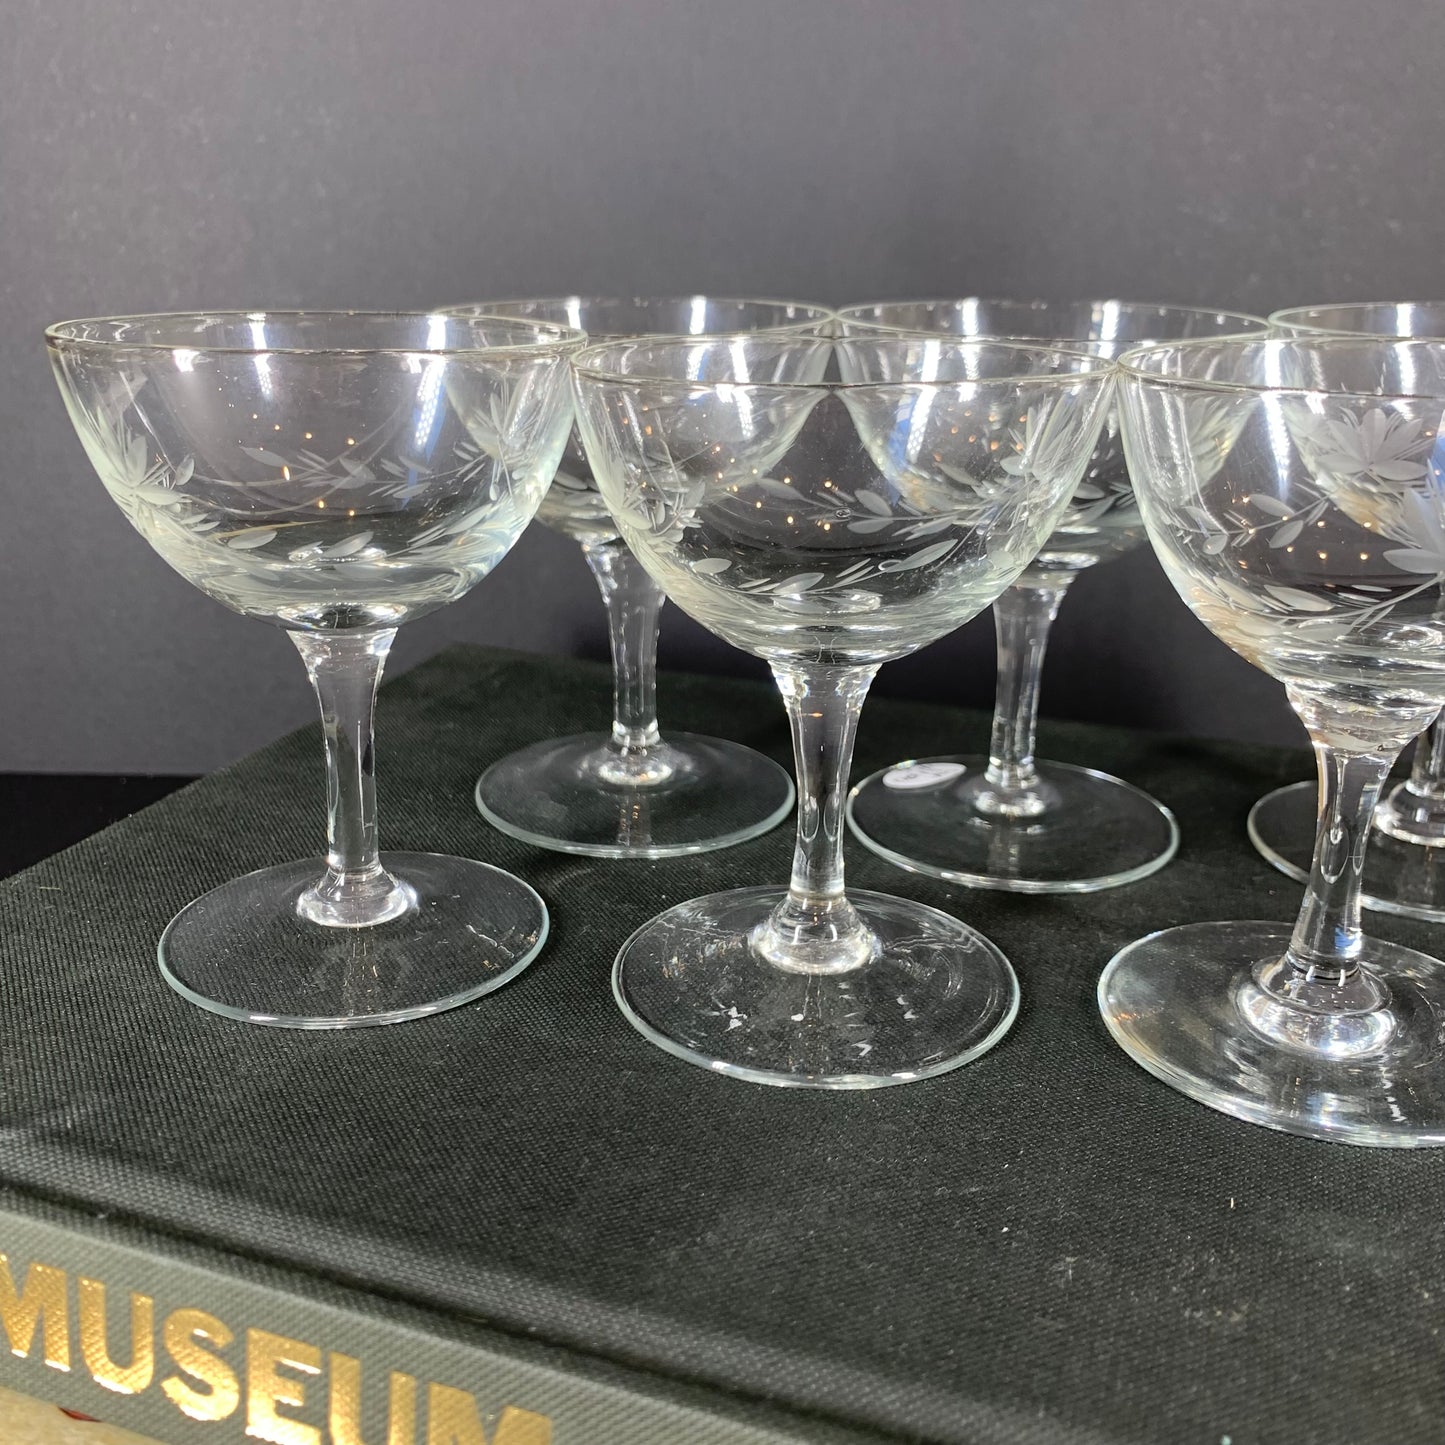 Rare 1930s mini etched glass cocktail coupe